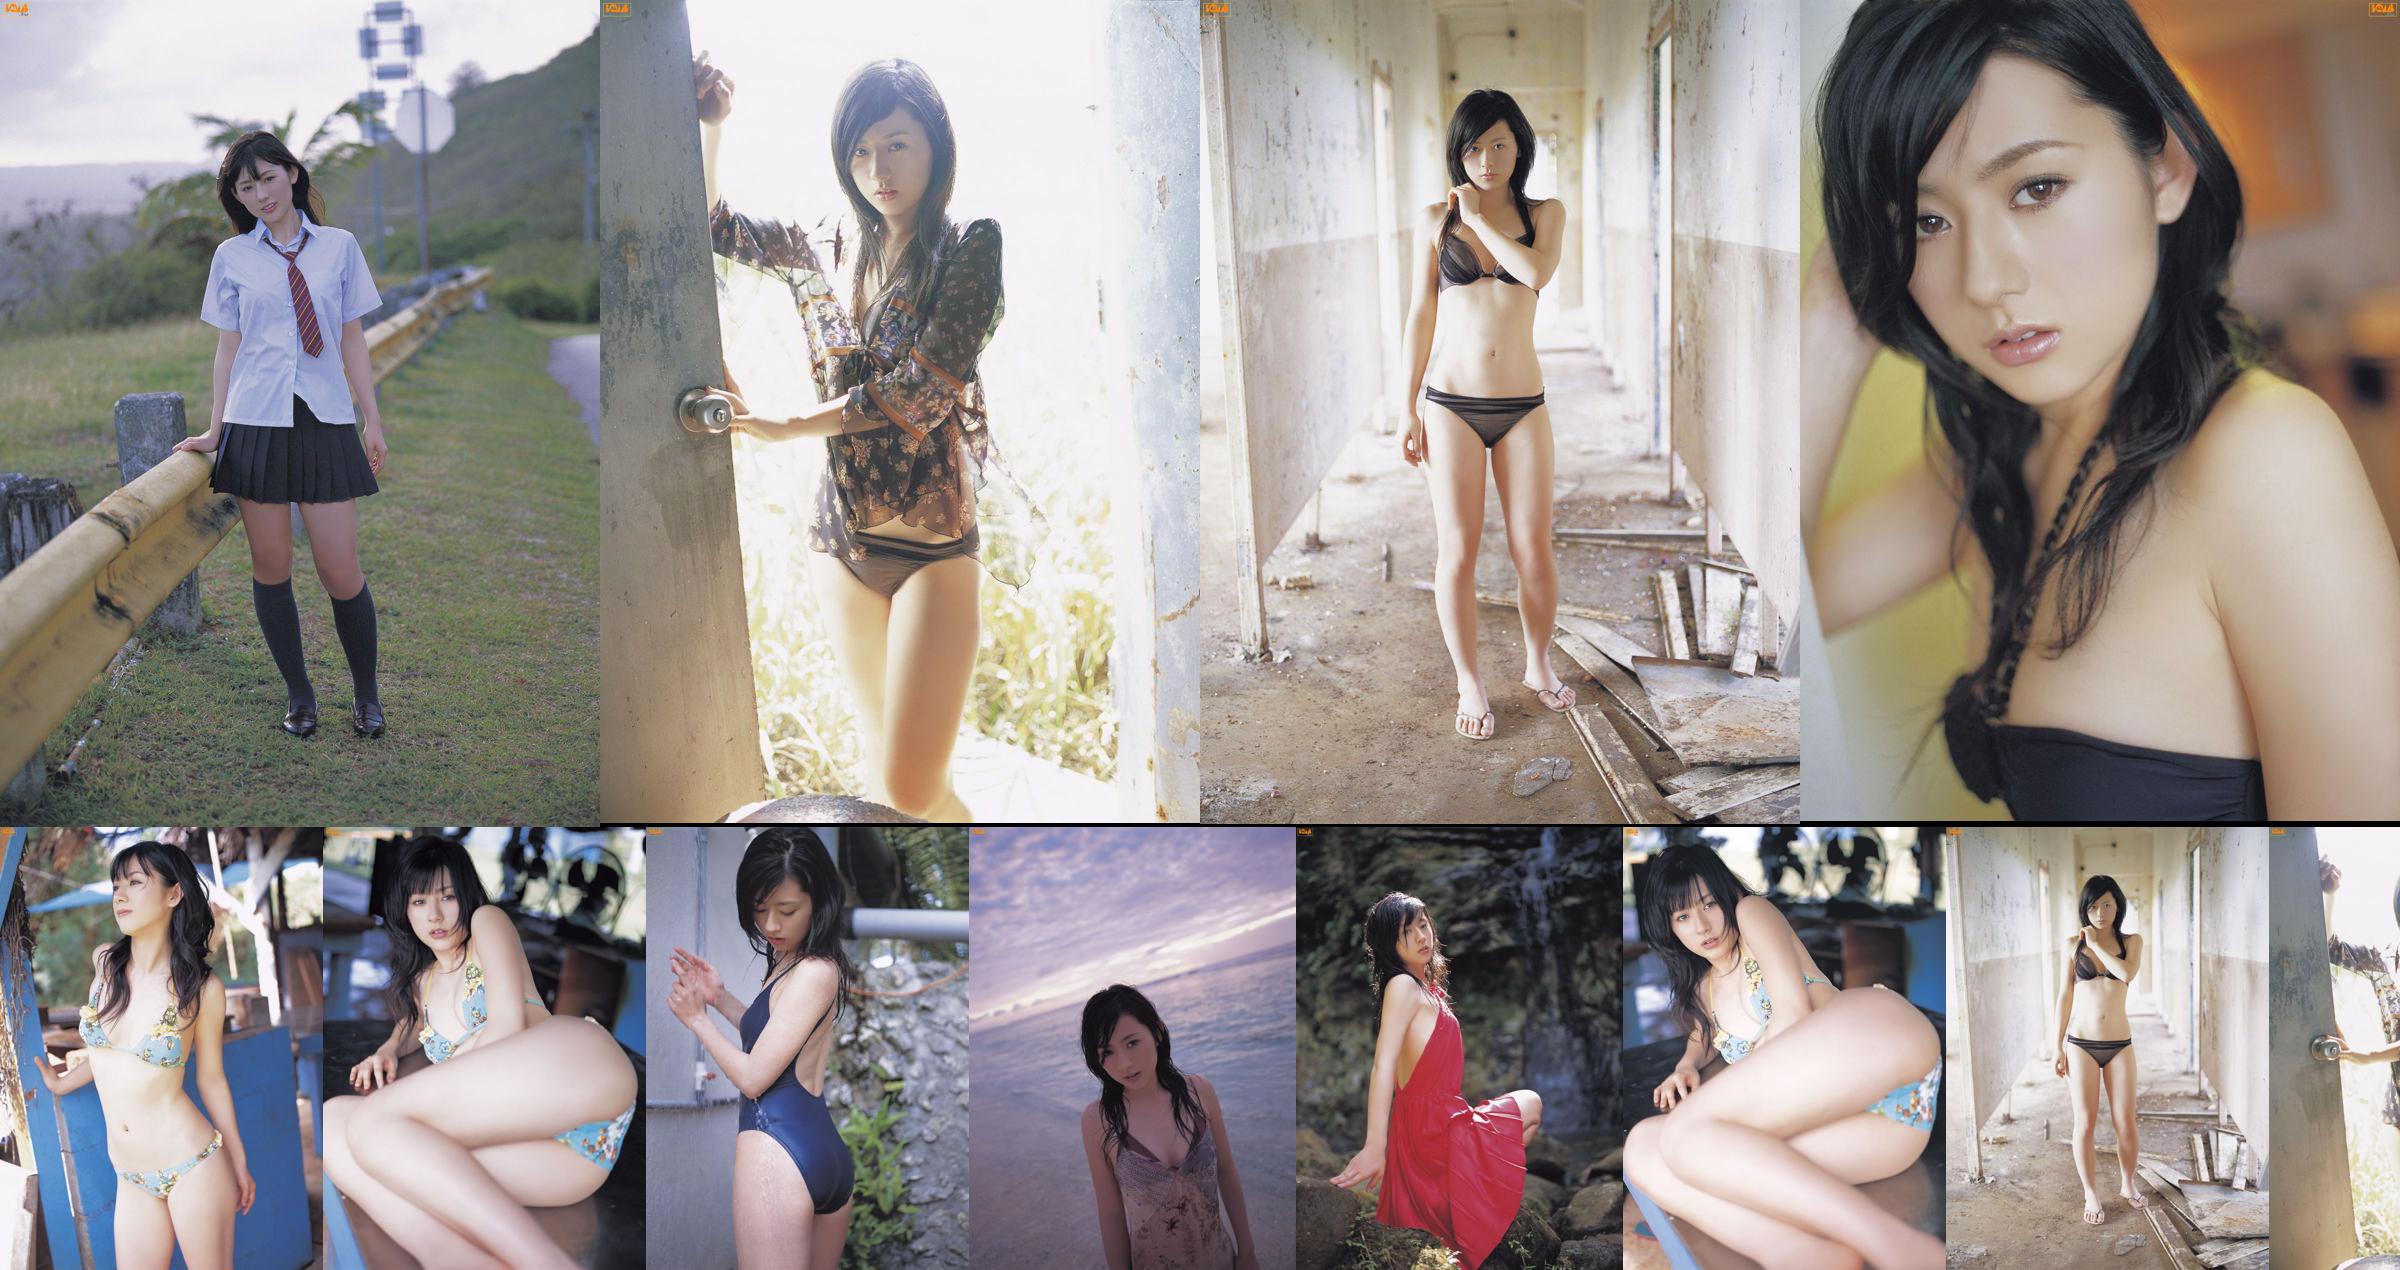 [Bomb.TV] May 2007 Miki Inase Miki Reo / Miki Reo No.68538f Page 2